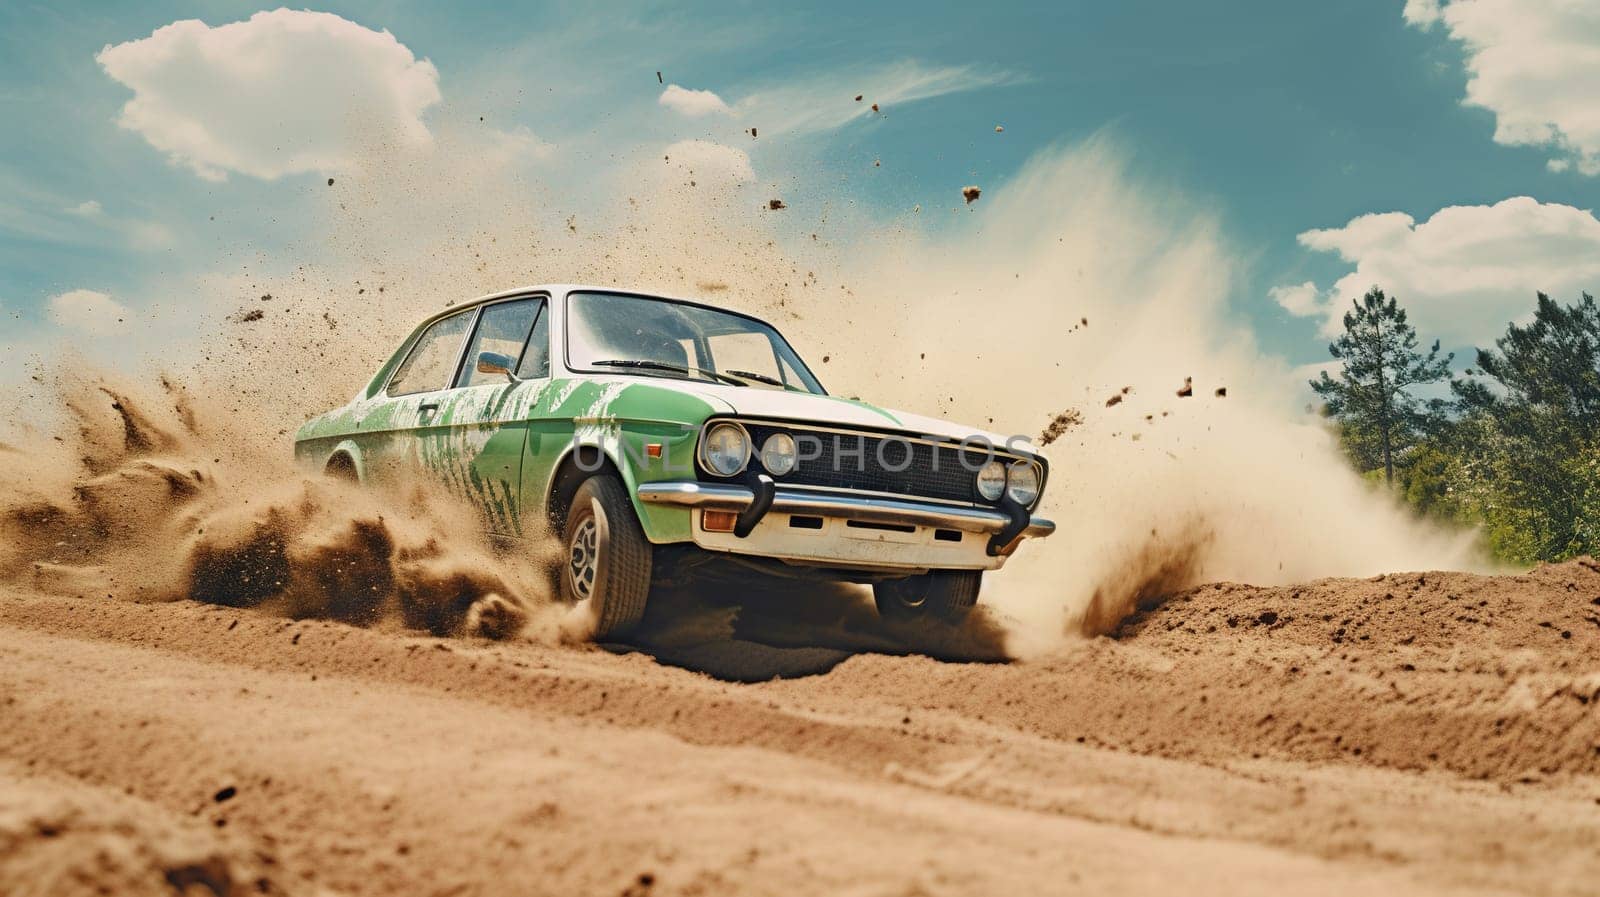 Vintage rally car splashing the dirt in retro 70s styled scene. Generated AI